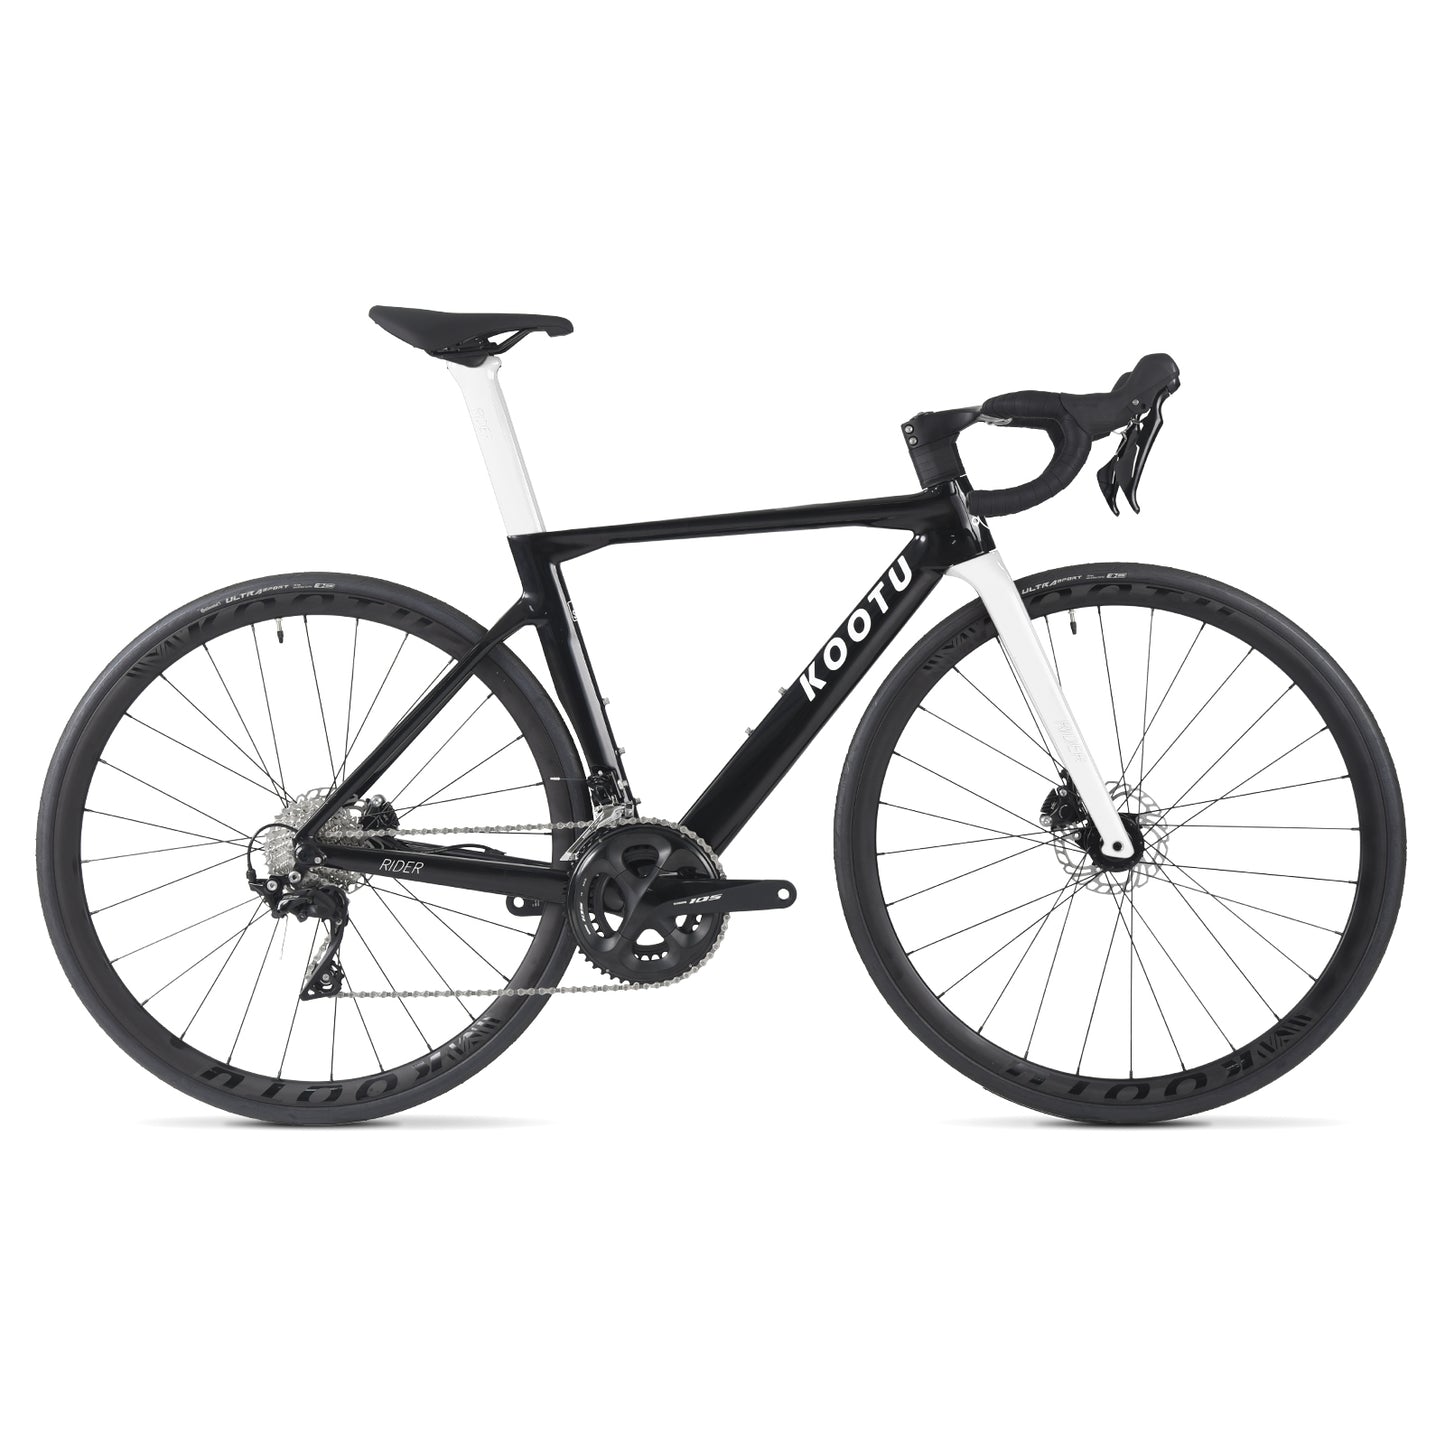 KOOTU RIDER Carbon Road Bike With Shimano 105 Groupset 22 Speed